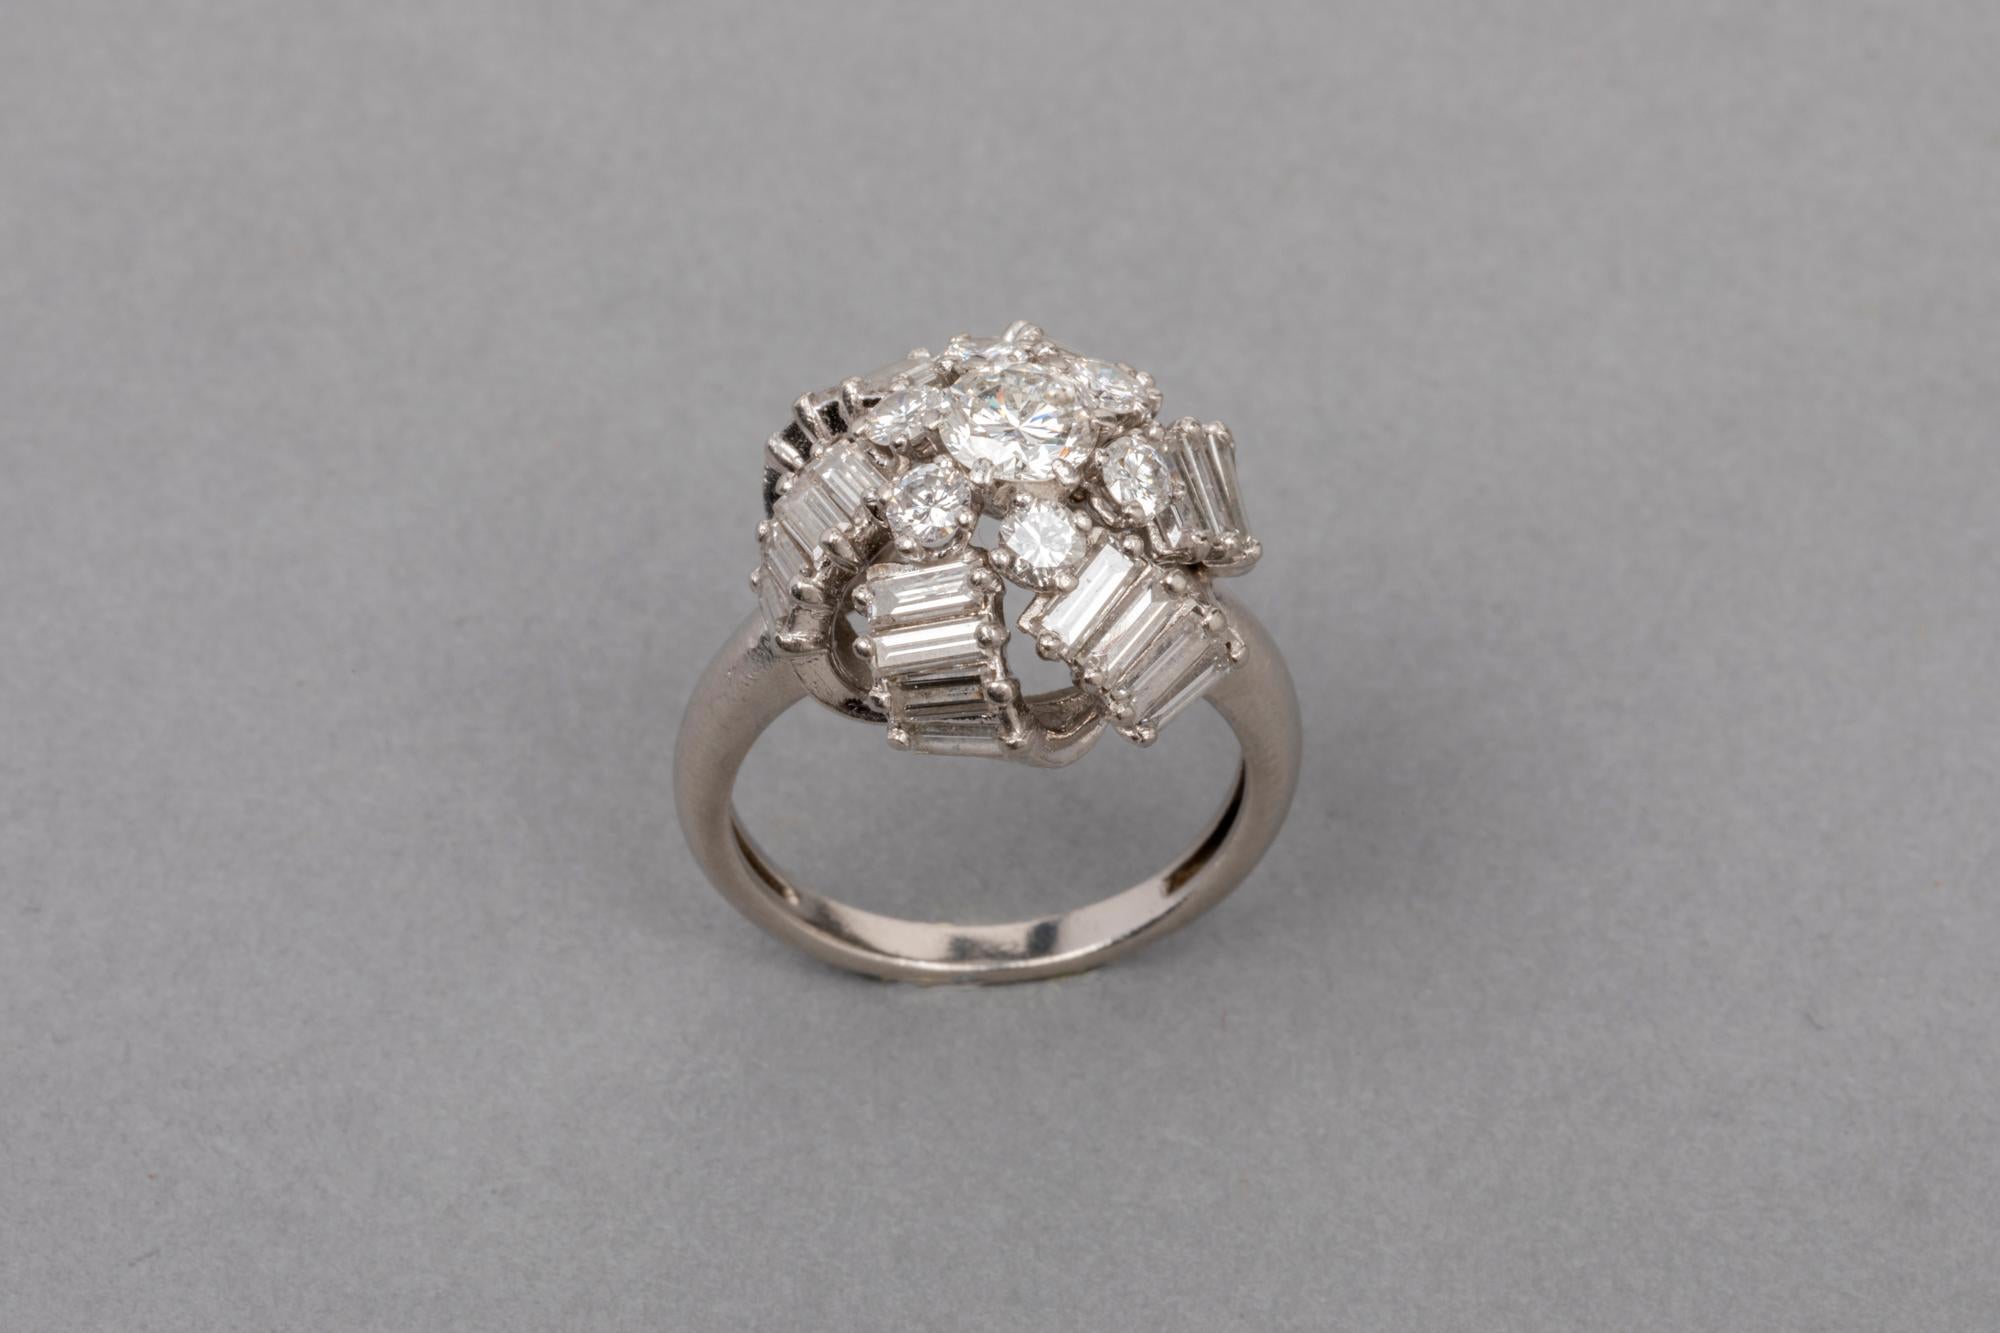 Very beautiful ring, made in France circa 1960.
Made with platinum (dog mark) and high quality diamonds. F/G colour and Vs clarity.
The central diamonds weights 0.45 carats estimate 
The 6 others around  weights 0.55 total estimate.
The 24 baguettes